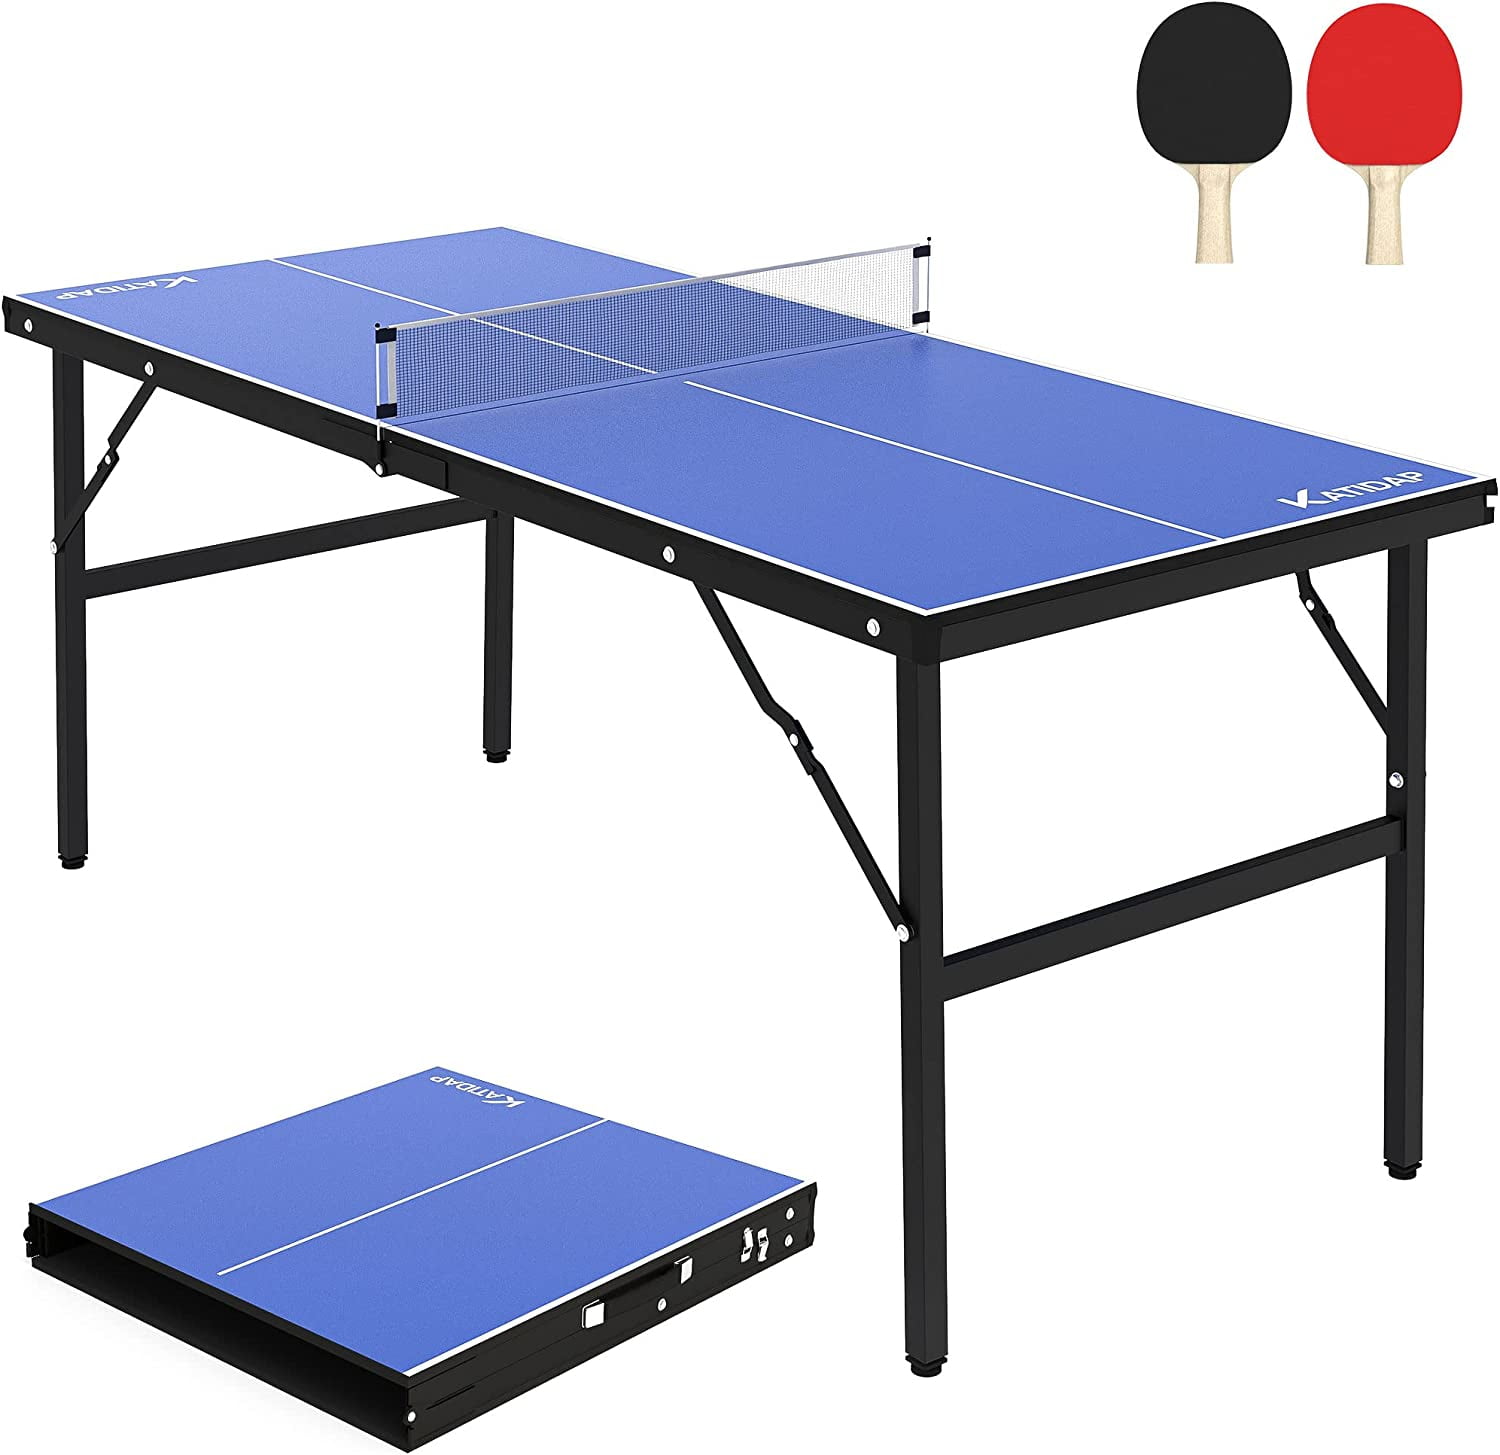 KATIDAP Blue Portable Ping Pong Table, Mid-Size Foldable Tennis Table with Net for Indoor Outdoor, 60 x 26 x 27.5 Inch